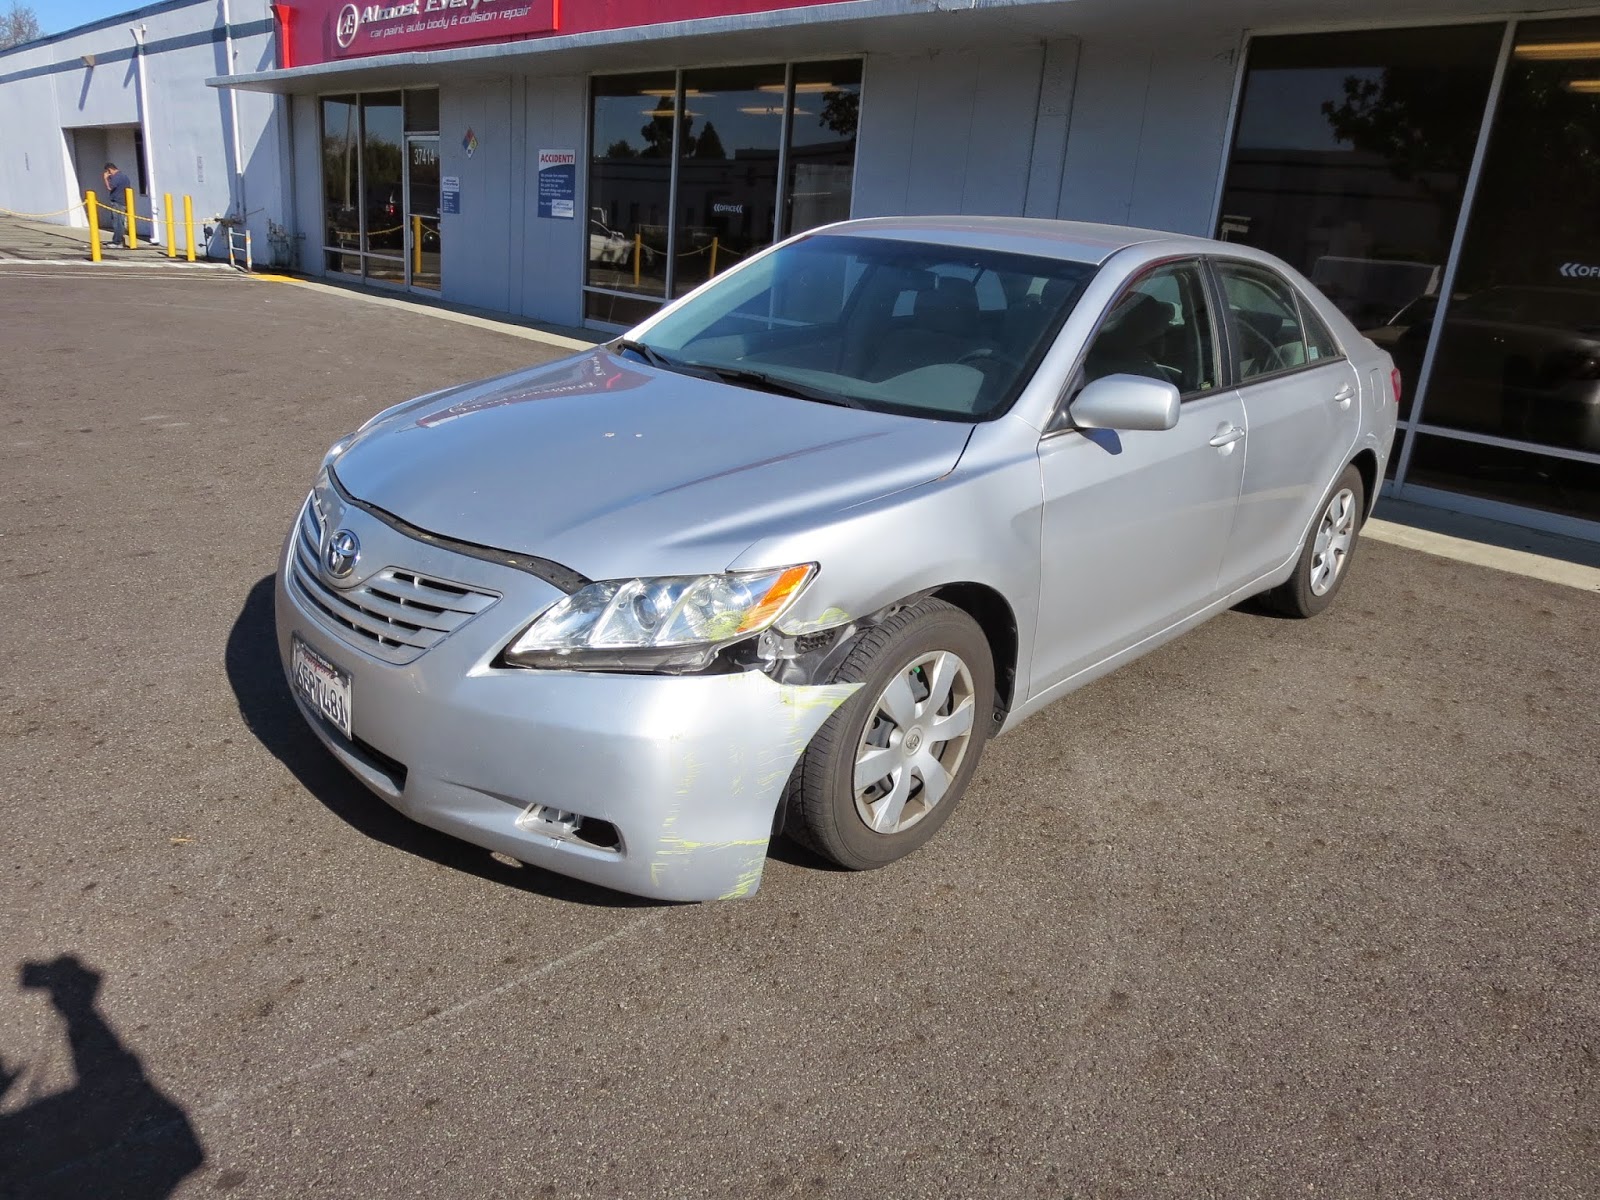 Damaged bumper and fender on 2009 Toyota Camry